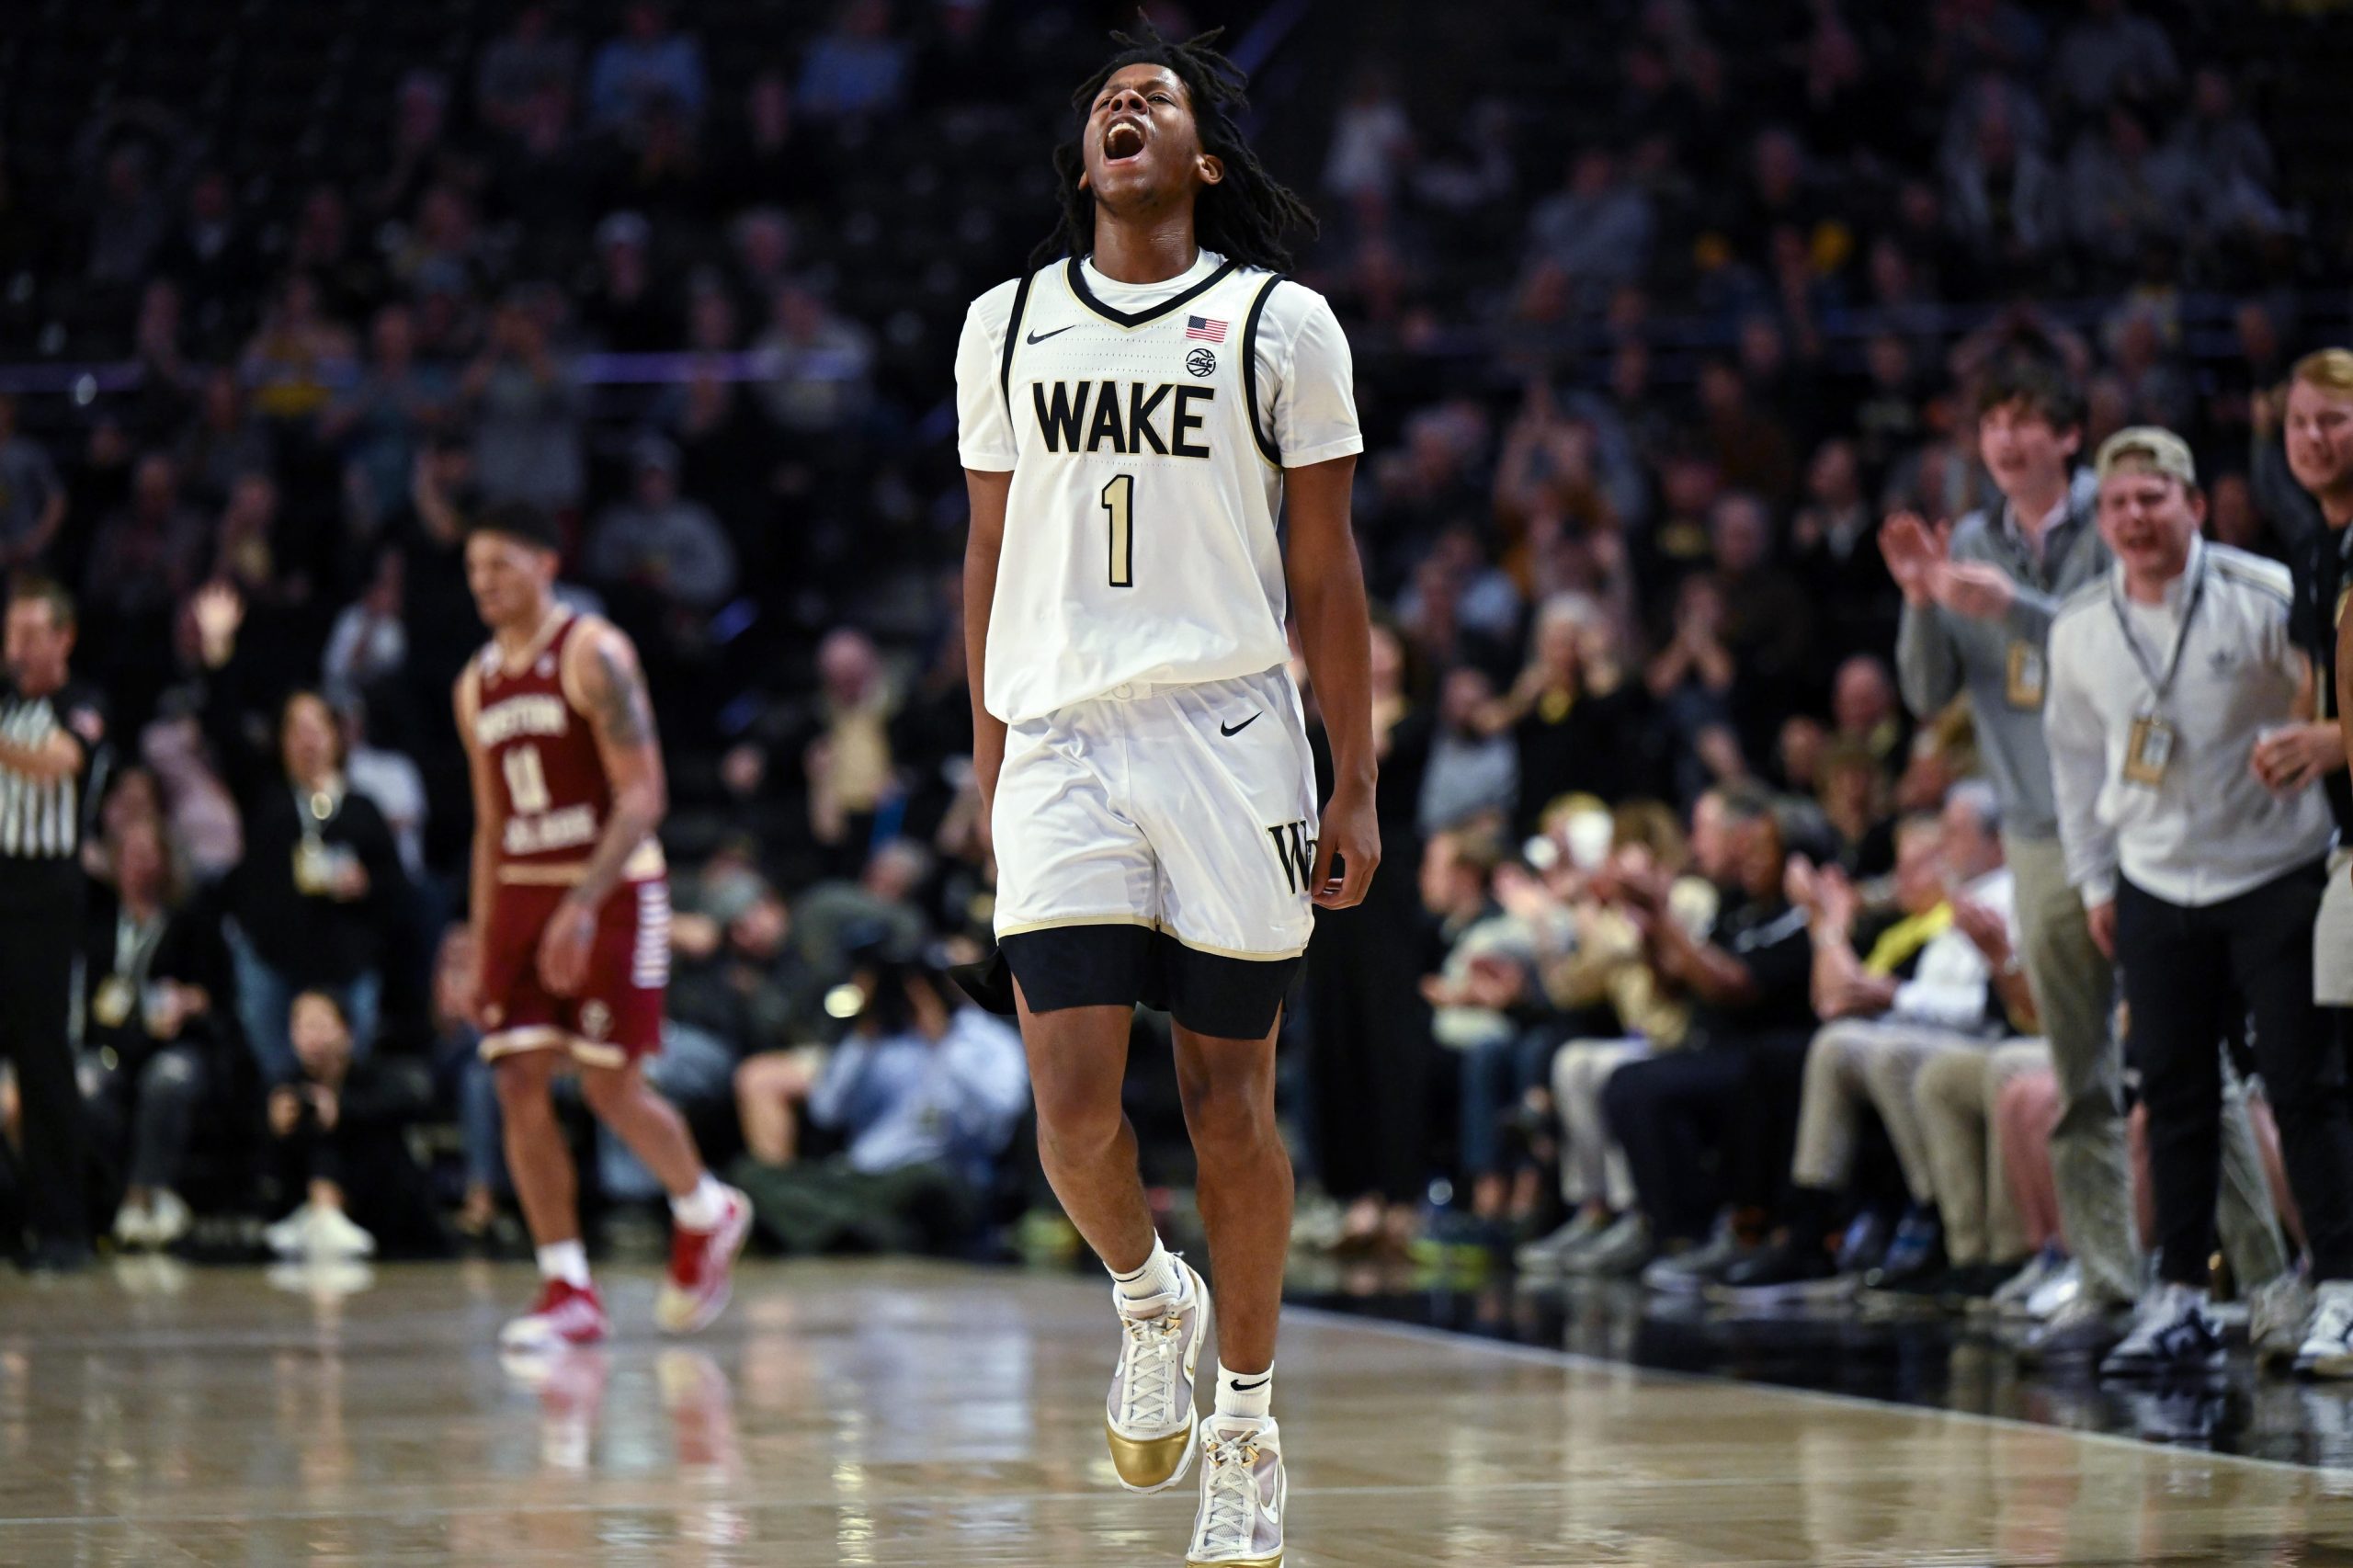 Feb 28, 2023; Winston-Salem, North Carolina, USA; Wake Forest Demon Deacons guard Tyree Appleby (1) celebrates after hitting a three during the second half at Lawrence Joel Veterans Memorial Coliseum. Mandatory Credit: William Howard-USA TODAY Sports